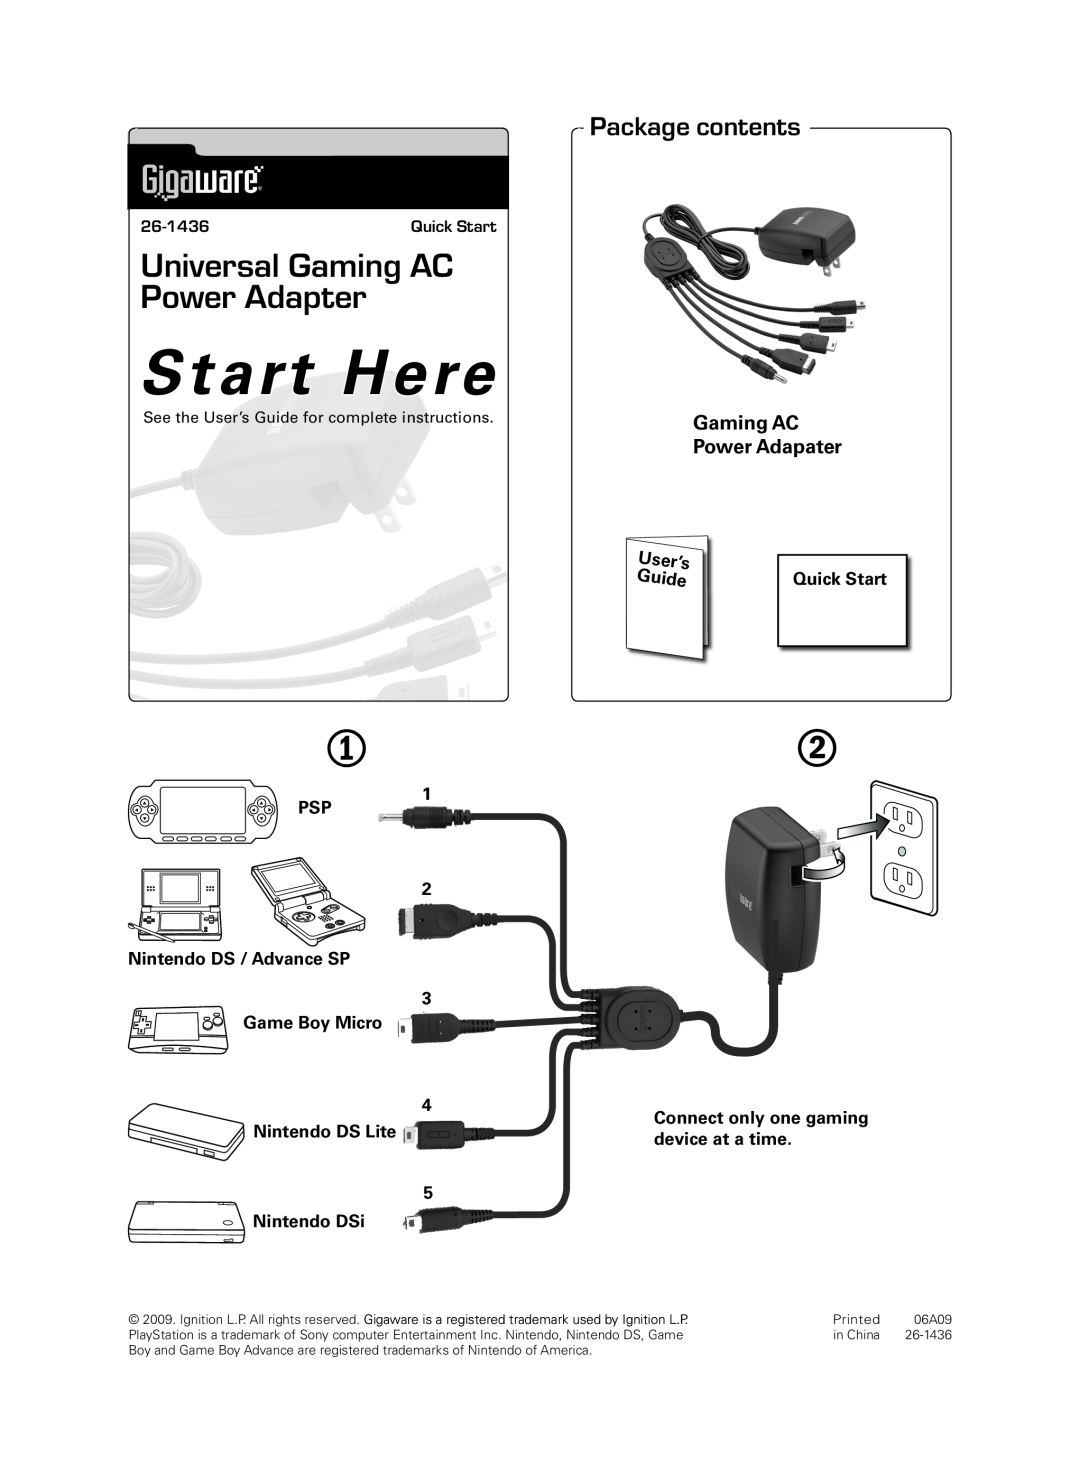 Radio Shack 26-1436 quick start Start Here, Universal Gaming AC Power Adapter, Package contents, Gaming AC Power Adapater 